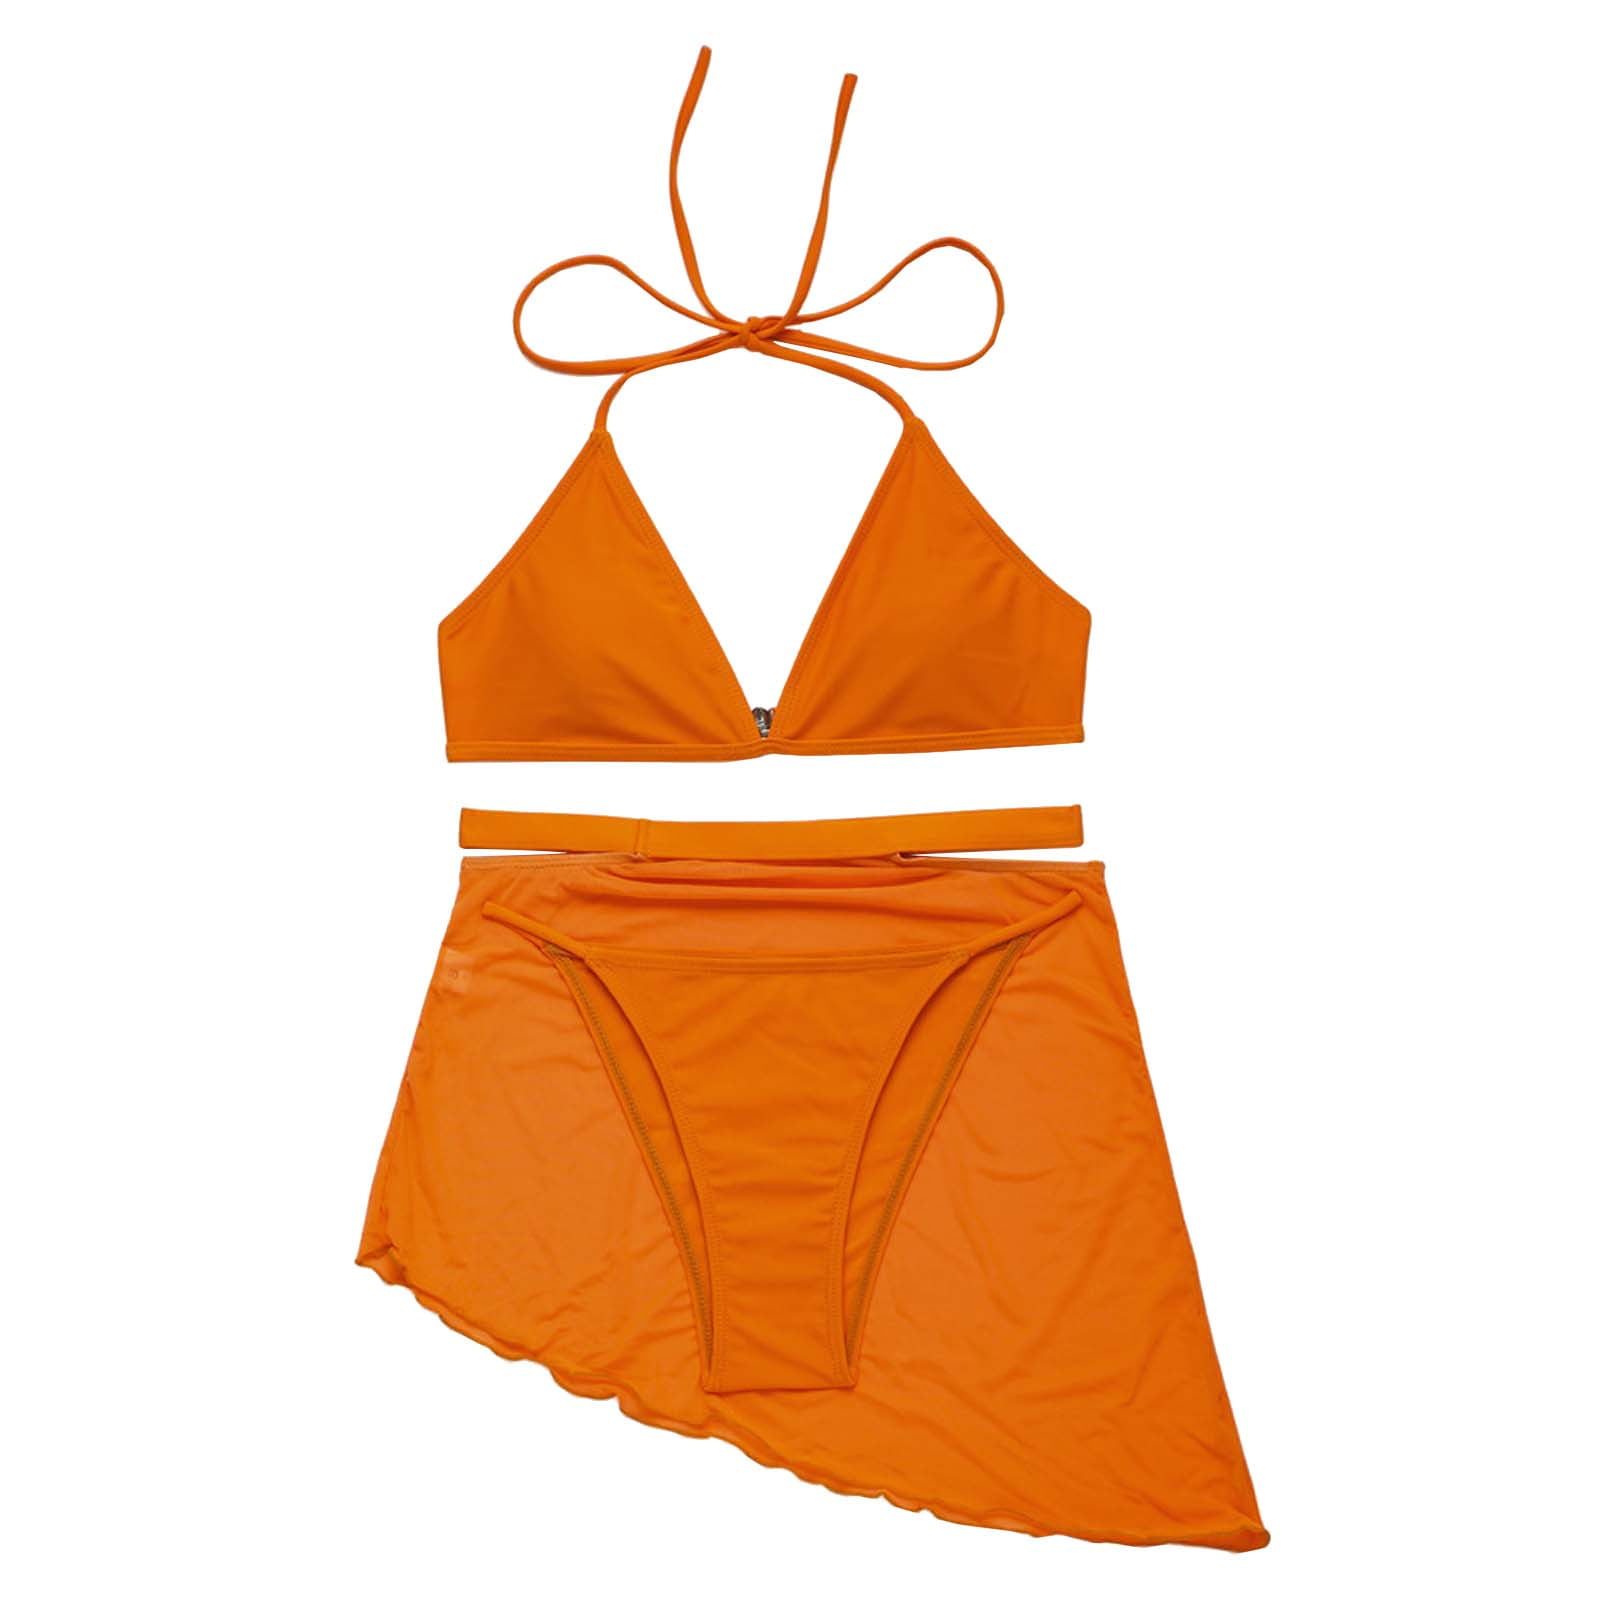 CZHJS Women's Thong Bikini Clearance Two Piece Bathing Suits Swimwear  Summer Beach Outfit Sexy Swimsuit for Women Floral Printing Ombre Halter  Lace up Cheeky High Waisted Brazilian Bikini Orange L 